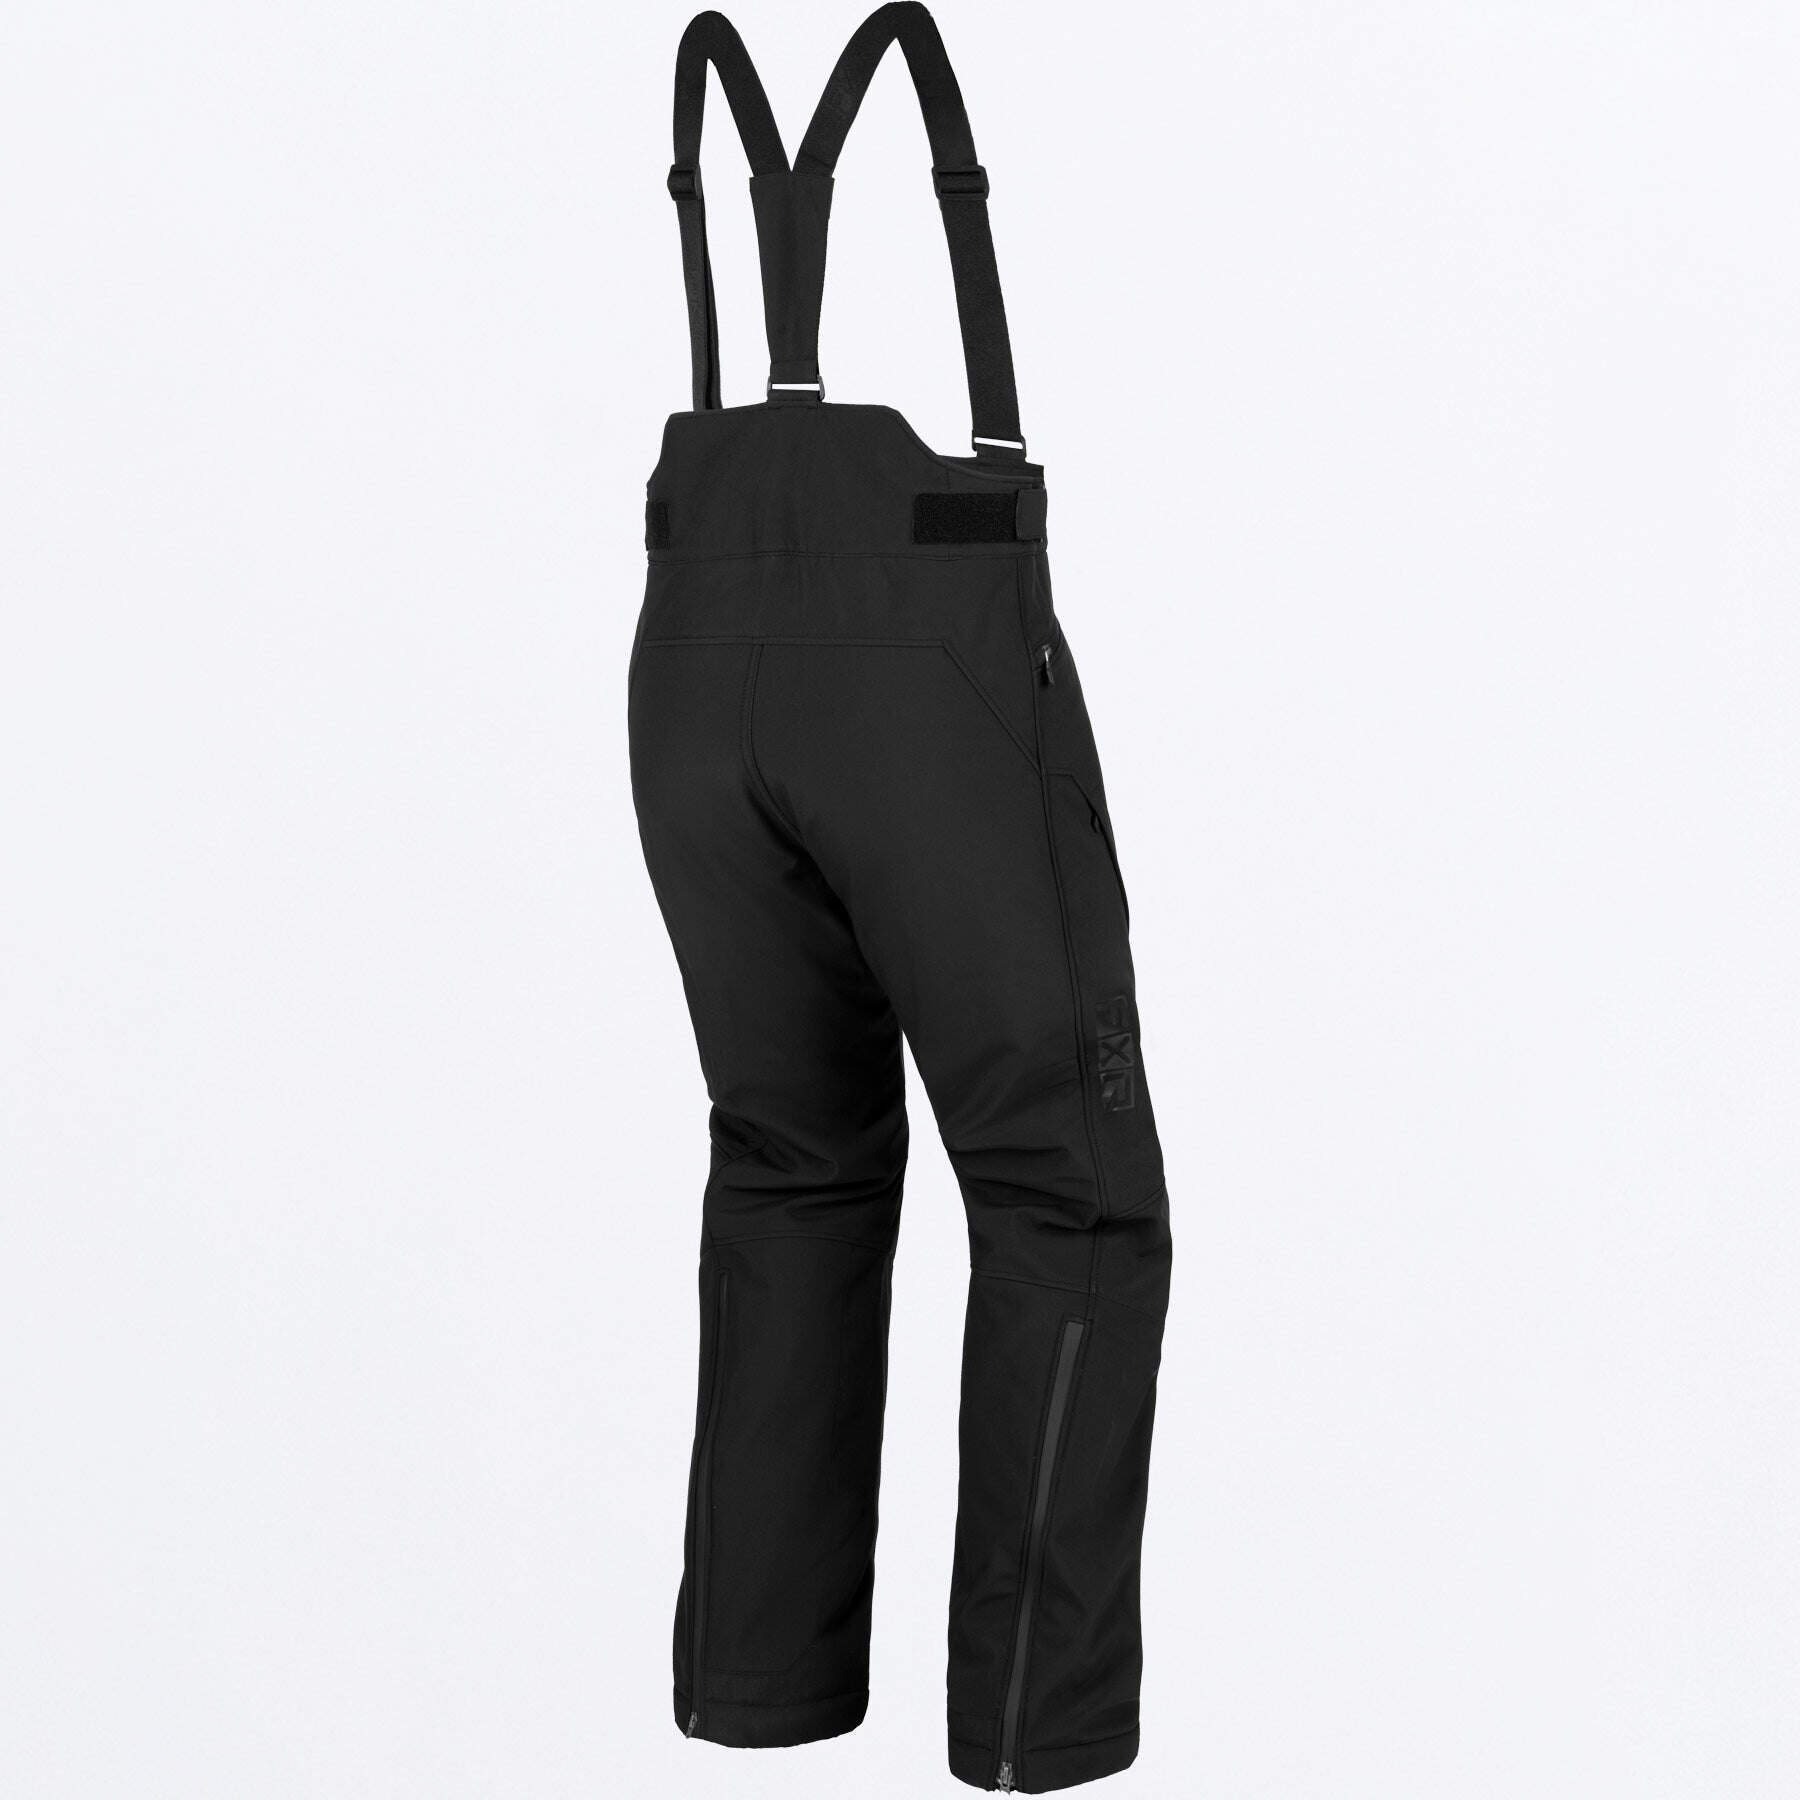 Men's Vertical Pro Insulated Softshell Pant S Black Ops